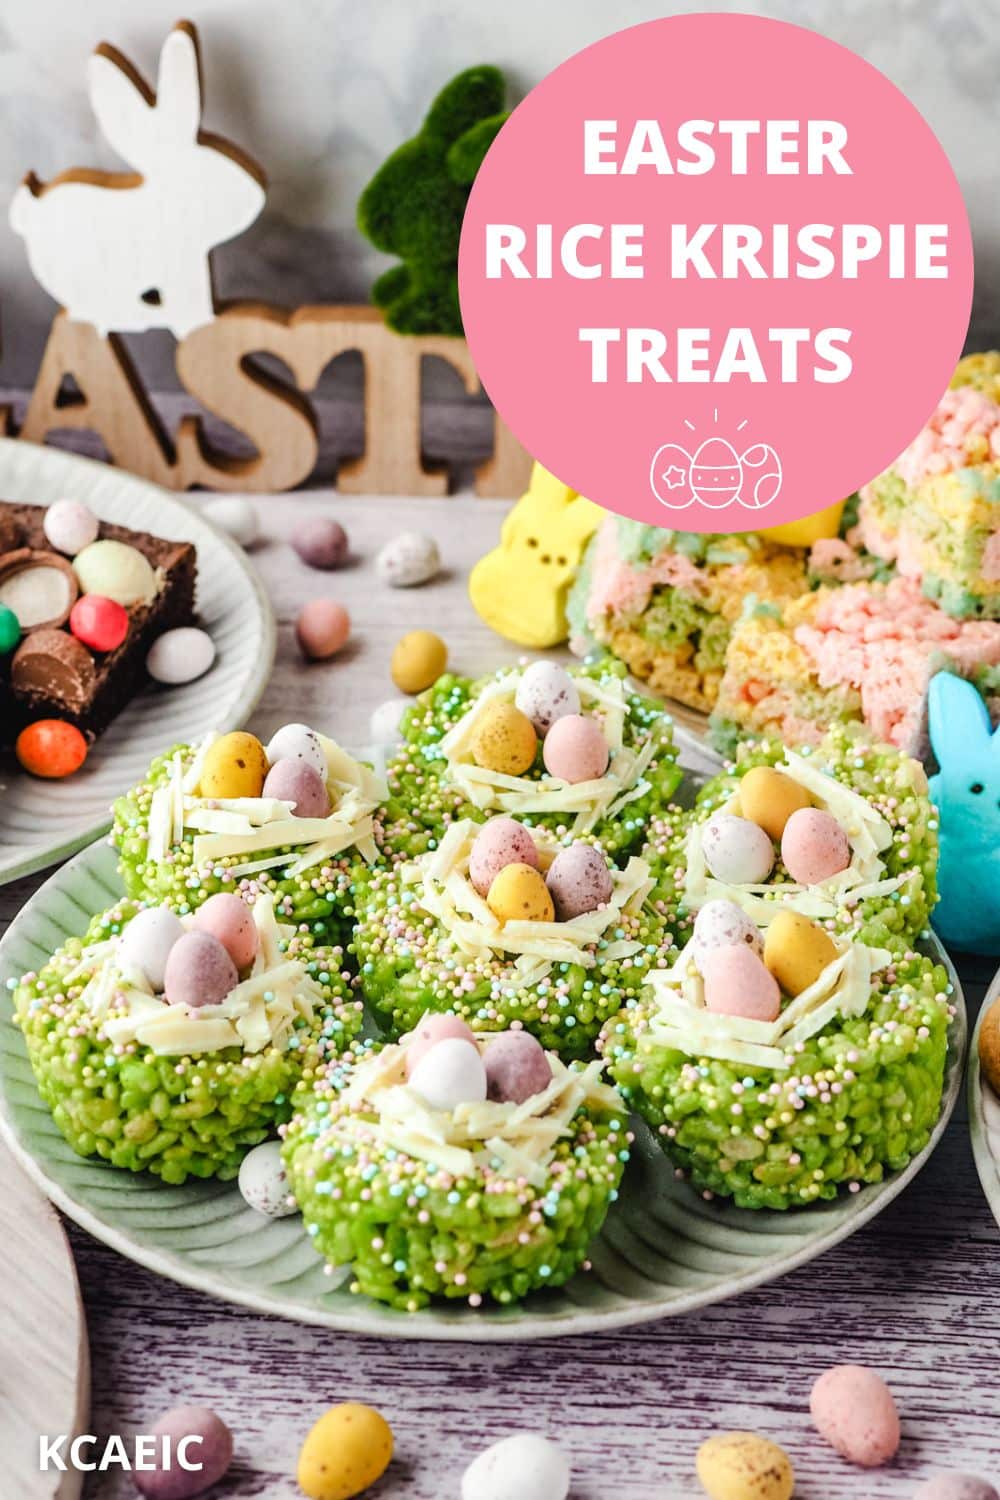 Easter rice krispie treats on a plate surrounded by Easter desserts and Easter decorations.